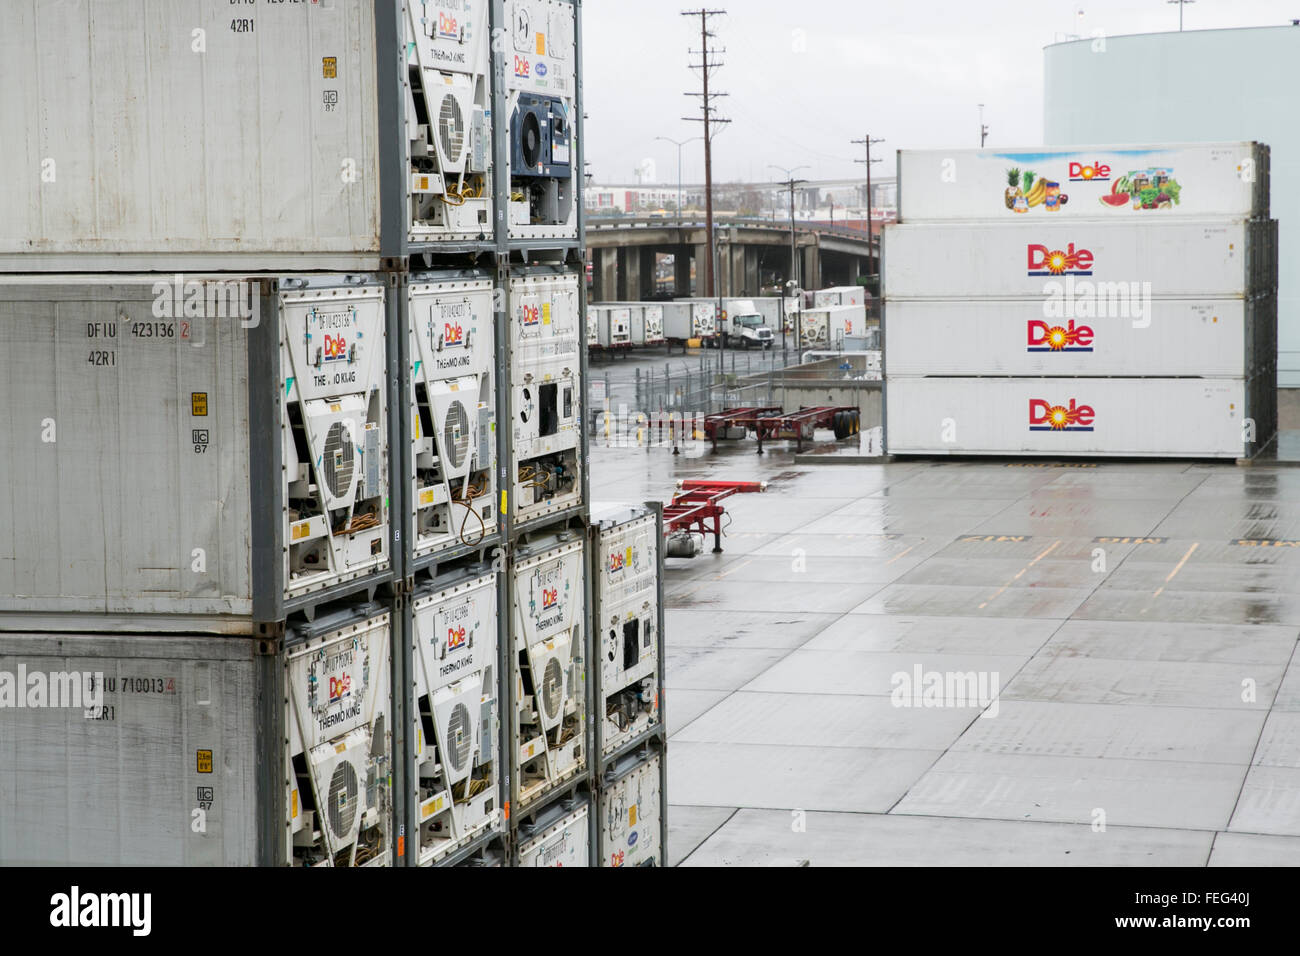 Shipping containers with the Dole Food Company, Inc., logo at a shipping facility in San Diego, California on January 31, 2016. Stock Photo